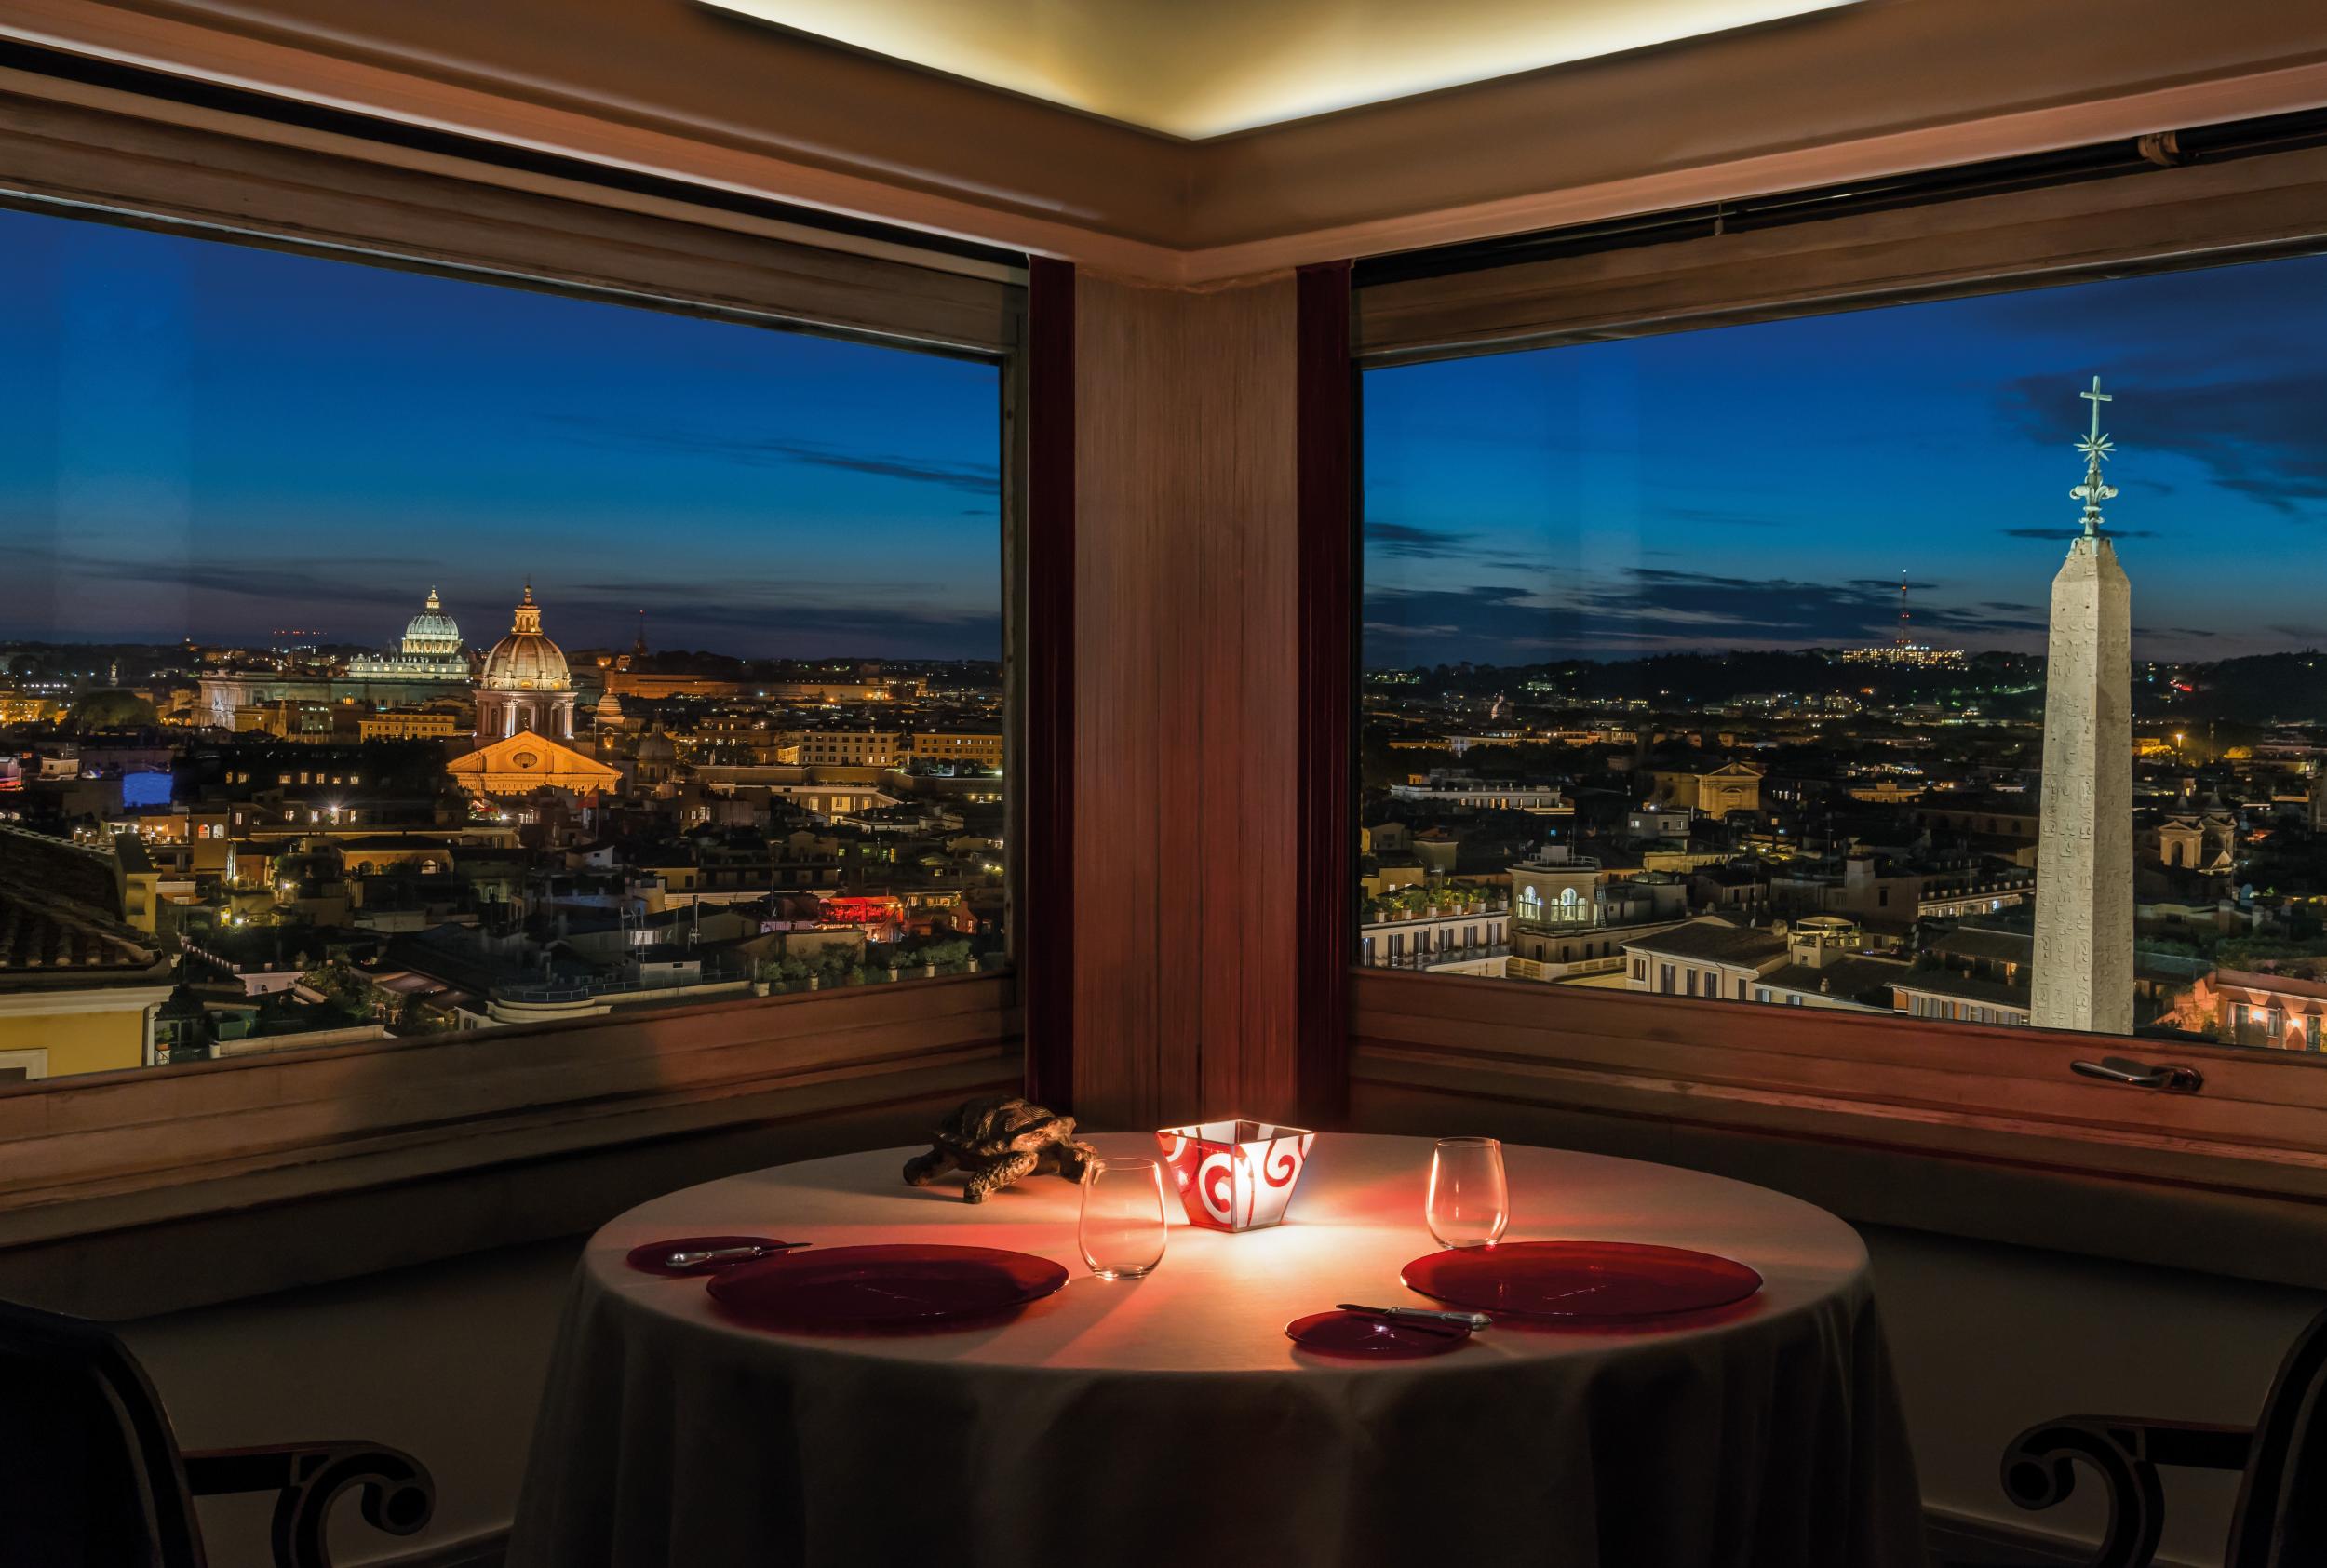 The Hassler's Michelin starred restaurant Imagò offers superb views of the city